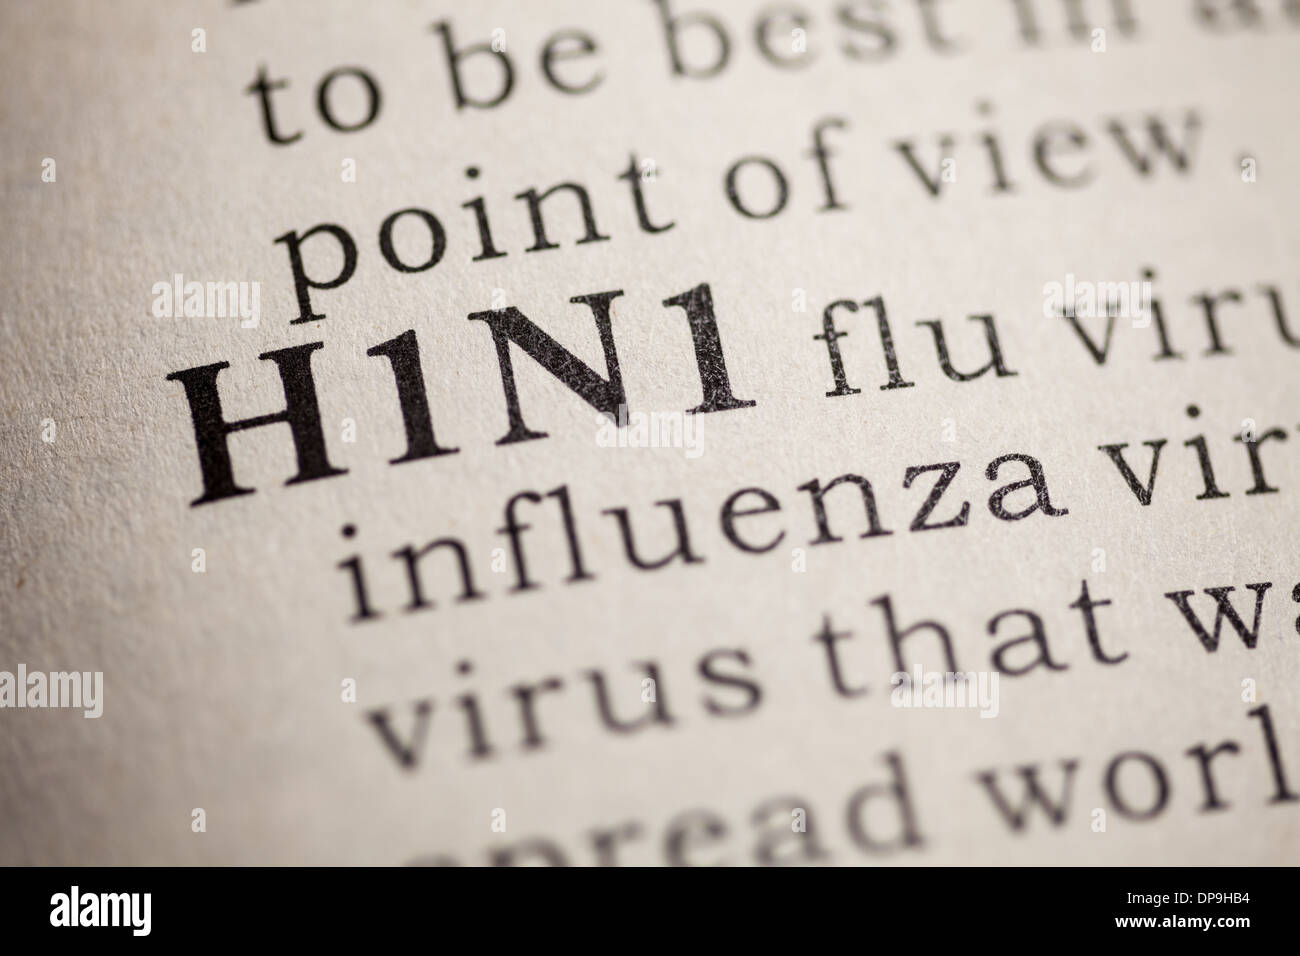 Fake Dictionary, Dictionary definition of the word H1N1 flu. Stock Photo